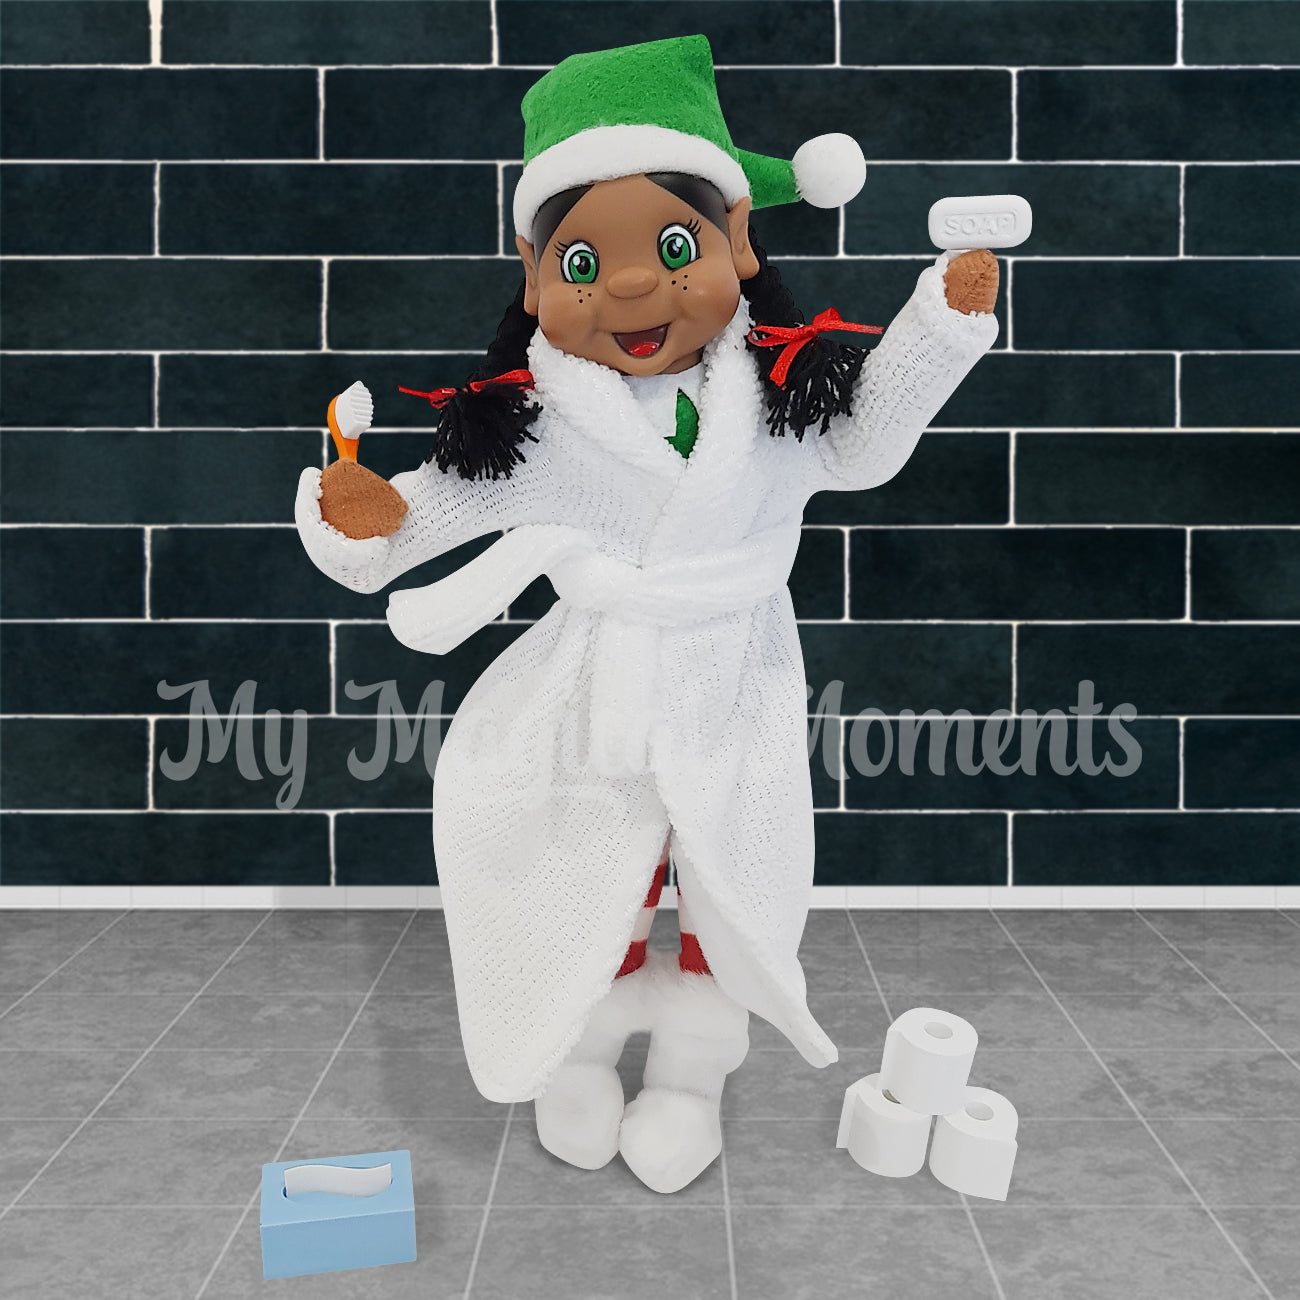 Black hair elf dressed in a bathrobe holding a mini toothbrush and soap. She's standing in the bathroom with toilet paper and tissues at her feet